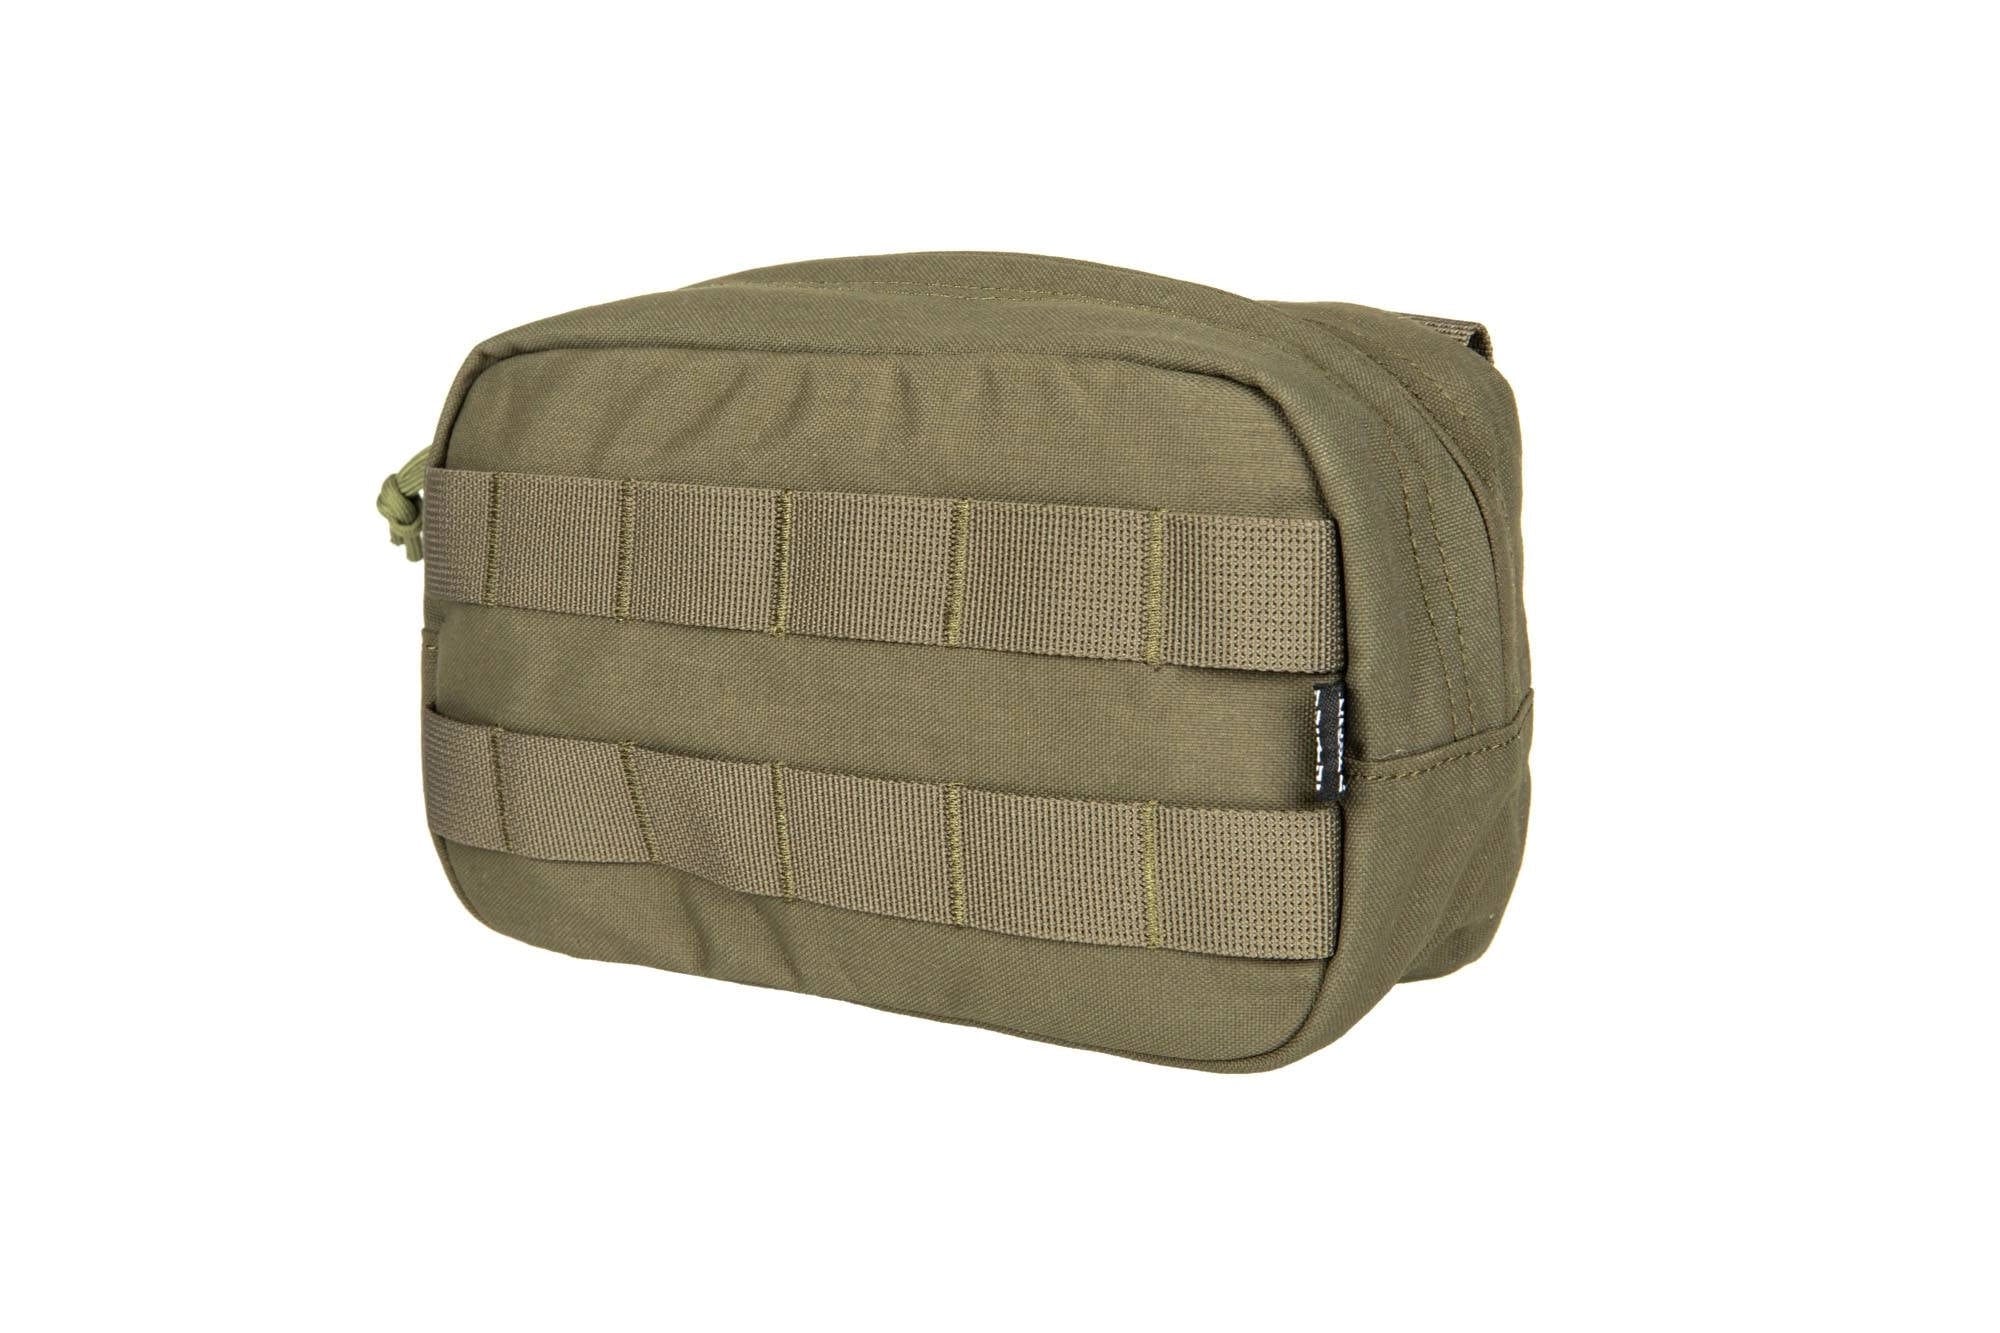 PRIMAL GEAR - Poche MOLLE Utility pouch horizontale Noir - Heritage Airsoft